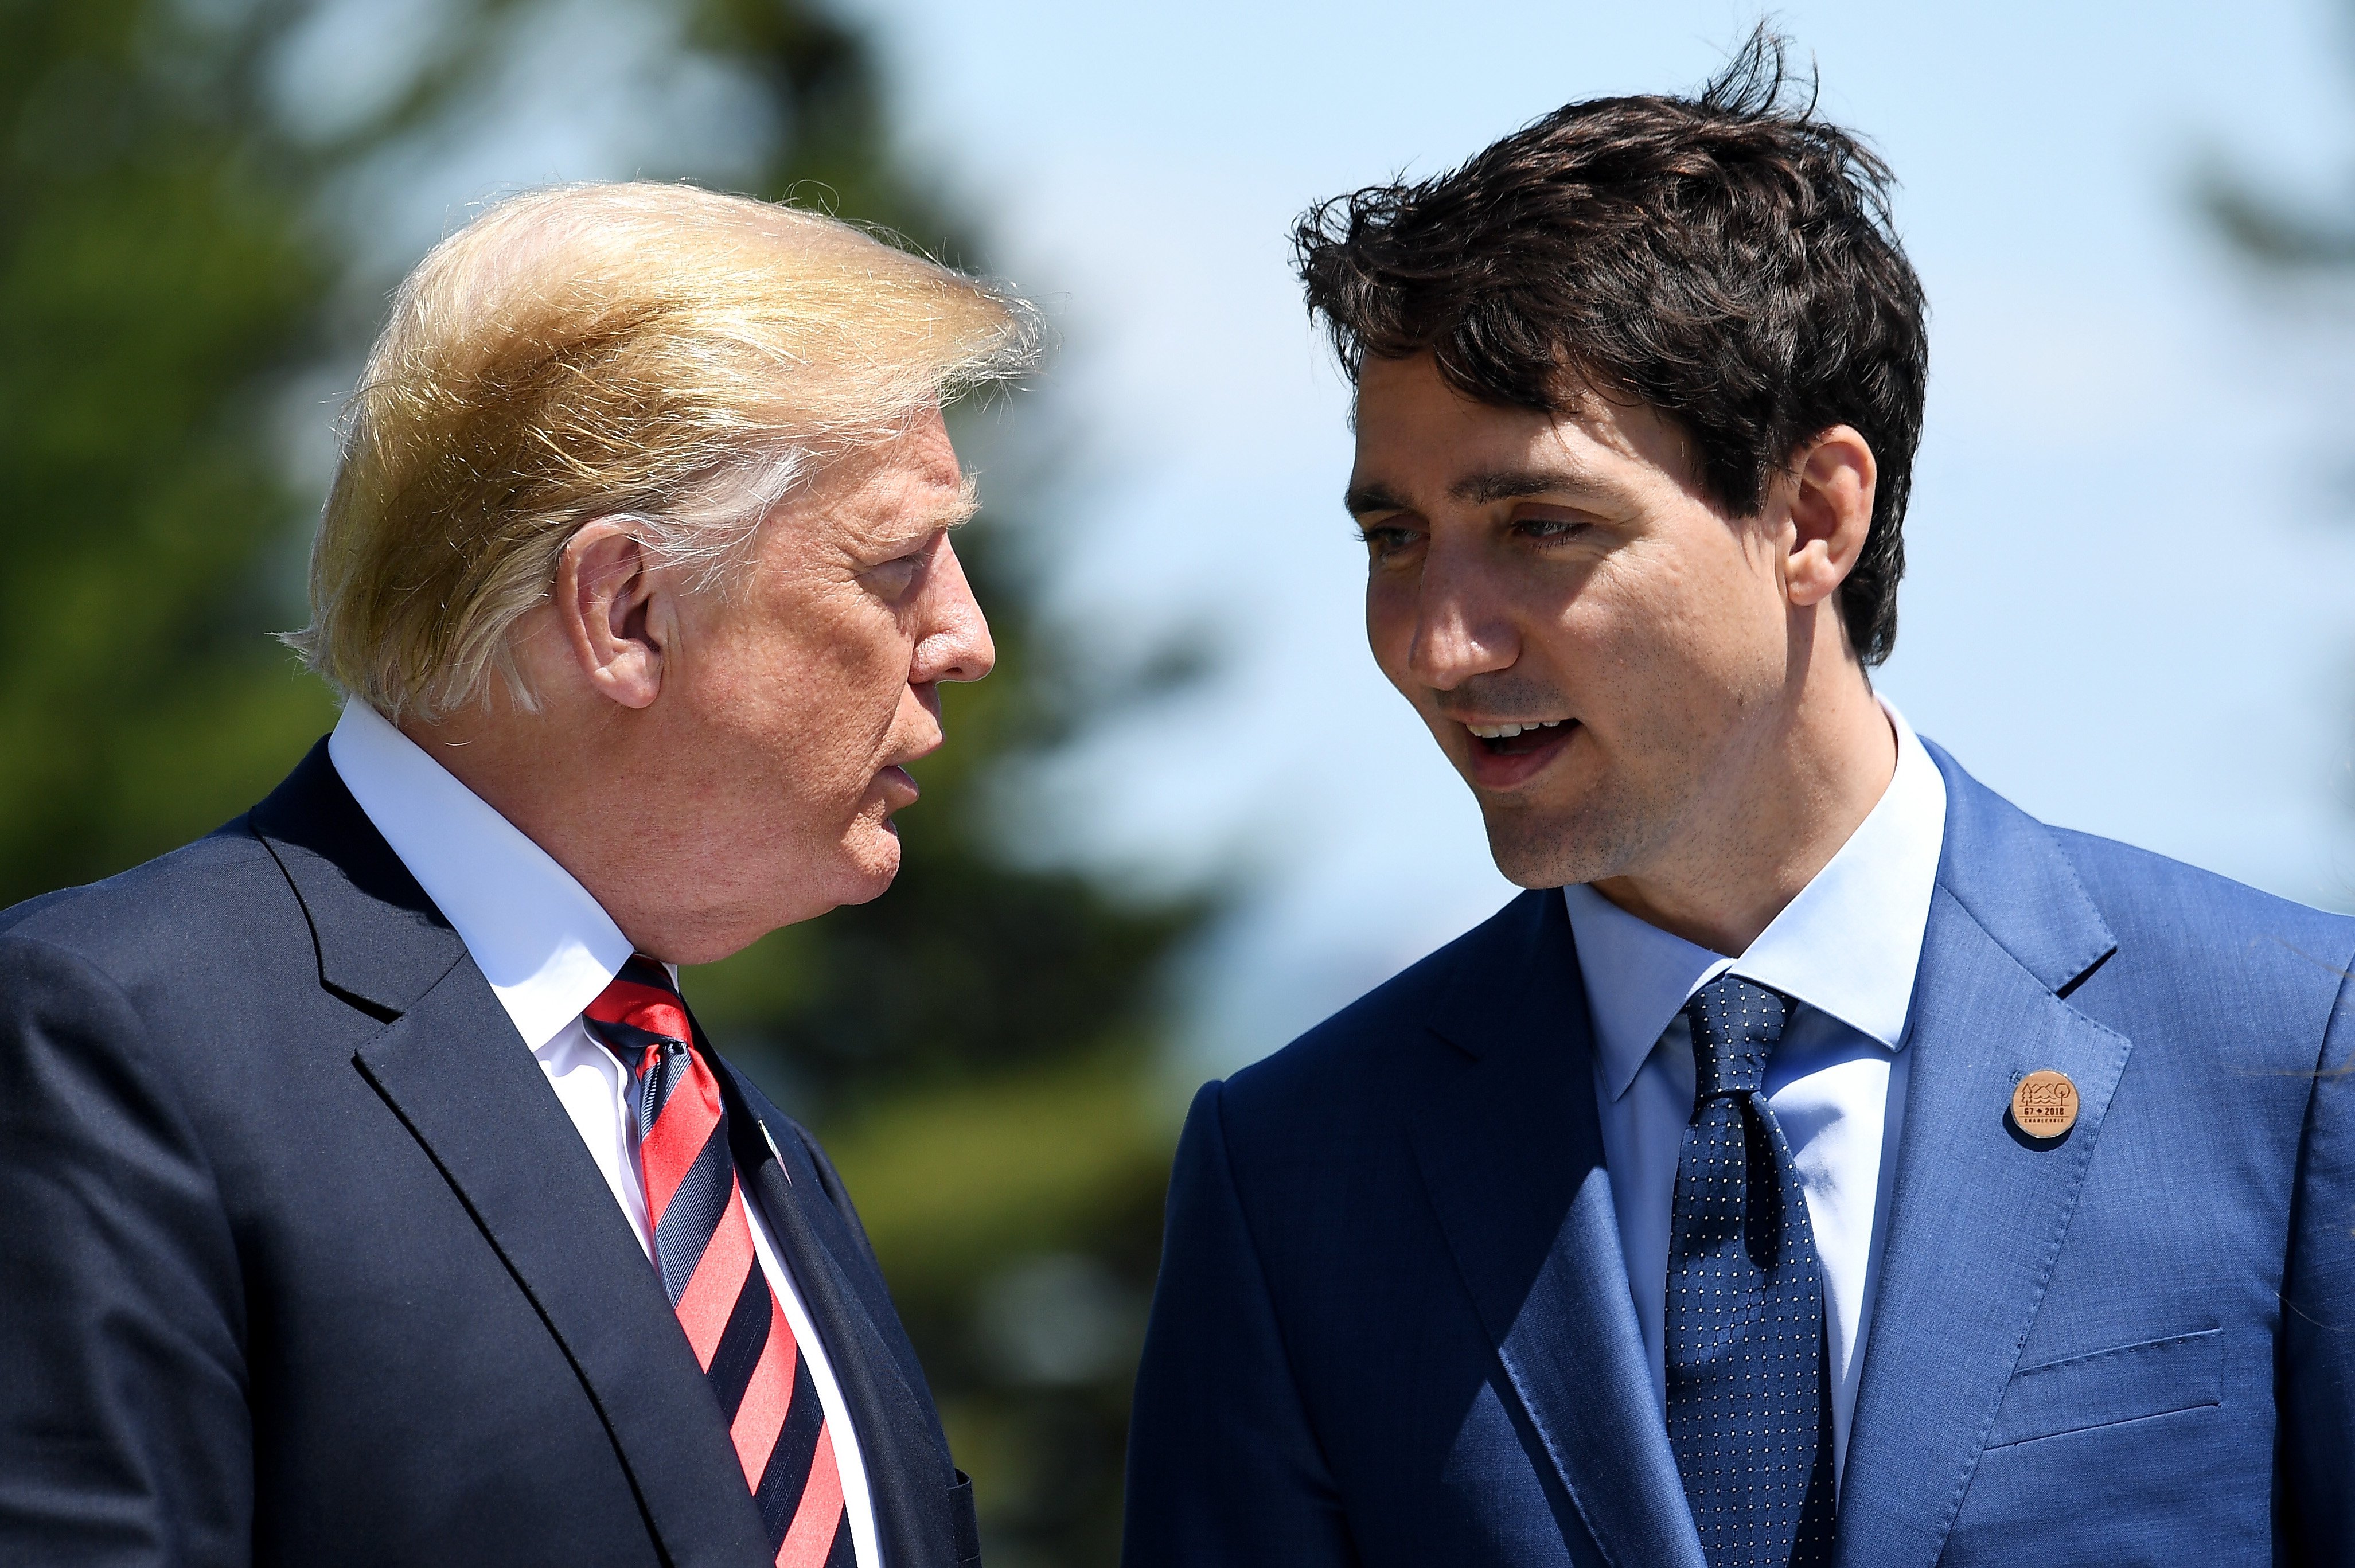 QUEBEC CITY, QC - JUNE 08: Prime Minister of Canada Justin Trudeau (R) speaks with U.S. President Donald Trump during the G7 official welcome at Le Manoir Richelieu on day one of the G7 meeting on June 8, 2018 in Quebec City, Canada. Canada will host the leaders of the UK, Italy, the US, France, Germany and Japan for the two day summit, in the town of La Malbaie. (Photo by Leon Neal/Getty Images)